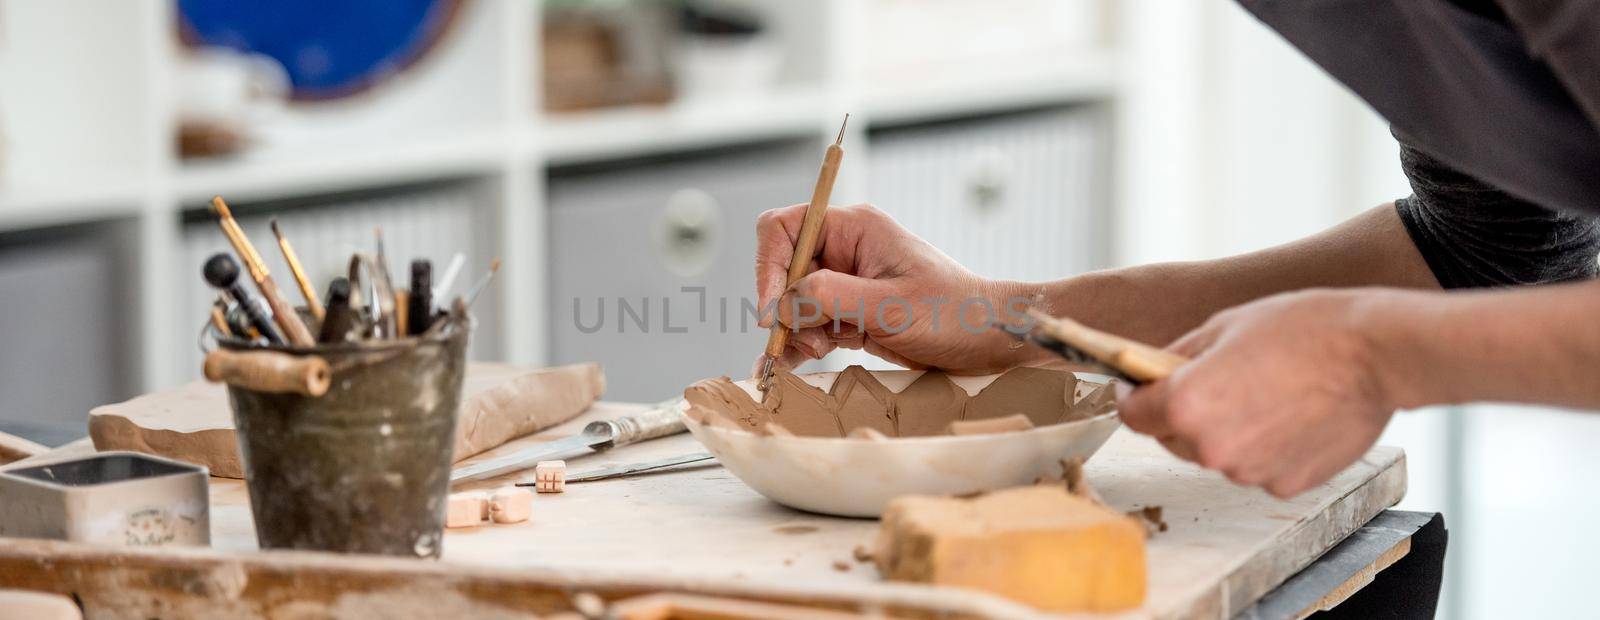 Woman potter using carving tool on plate mold at workshop